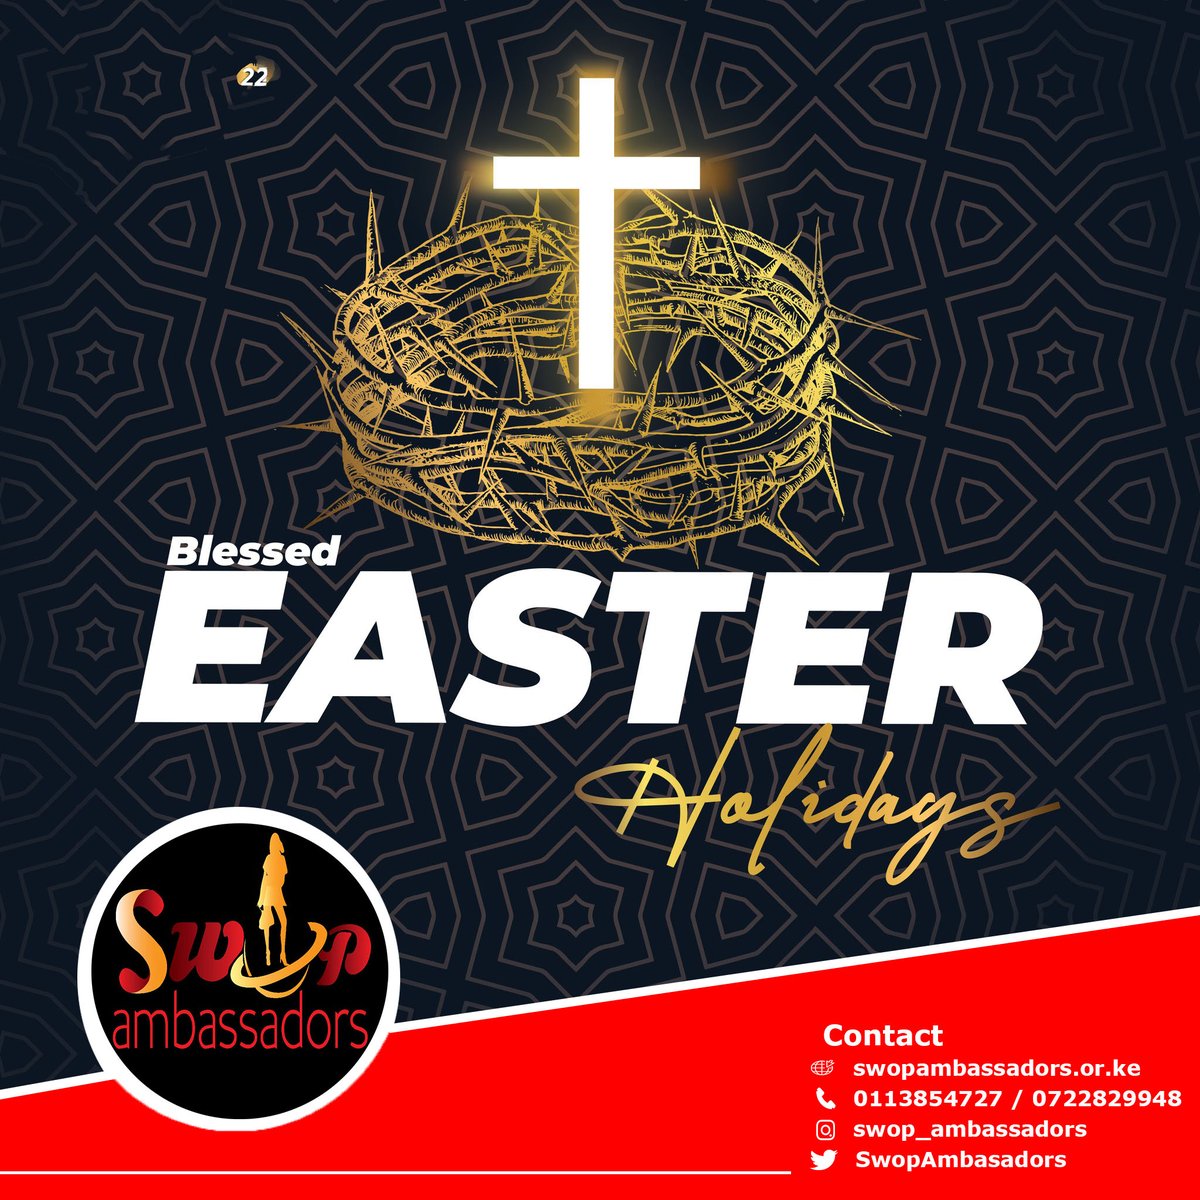 Swop Ambassadors wishes you a a blessed Easter holidays.